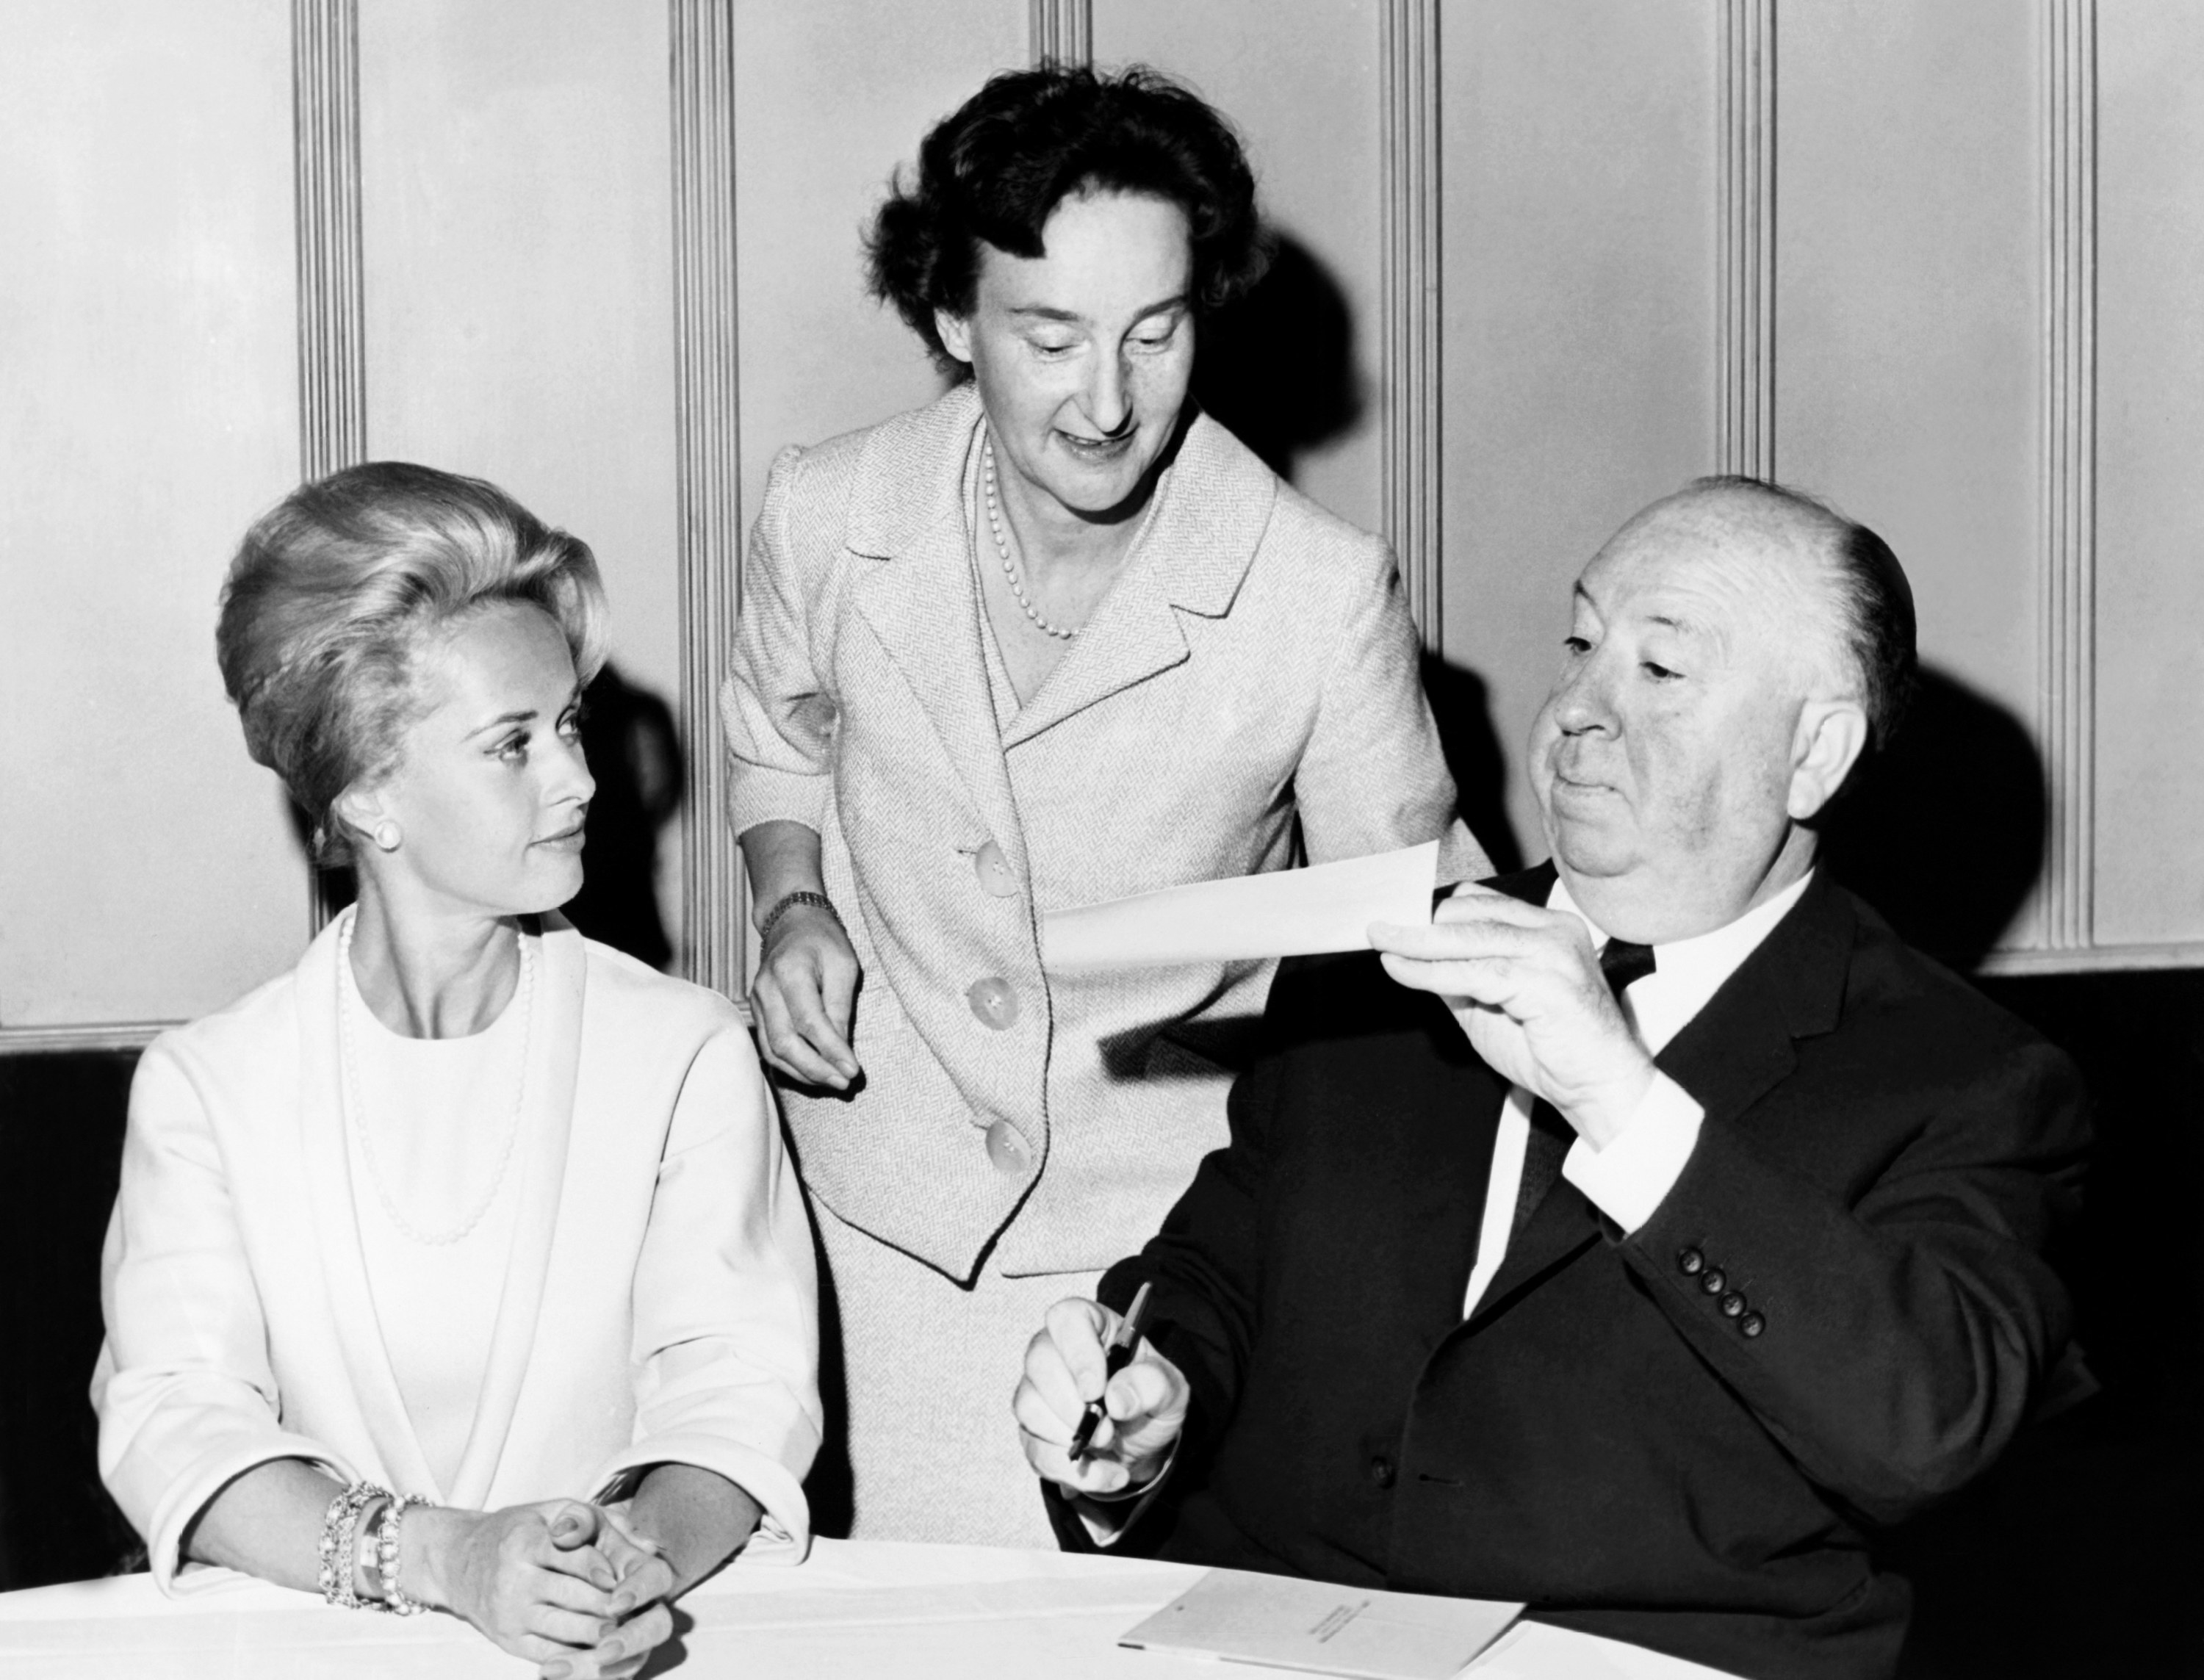 Hitchcock hands someone a piece of paper with Hedren sitting next to him